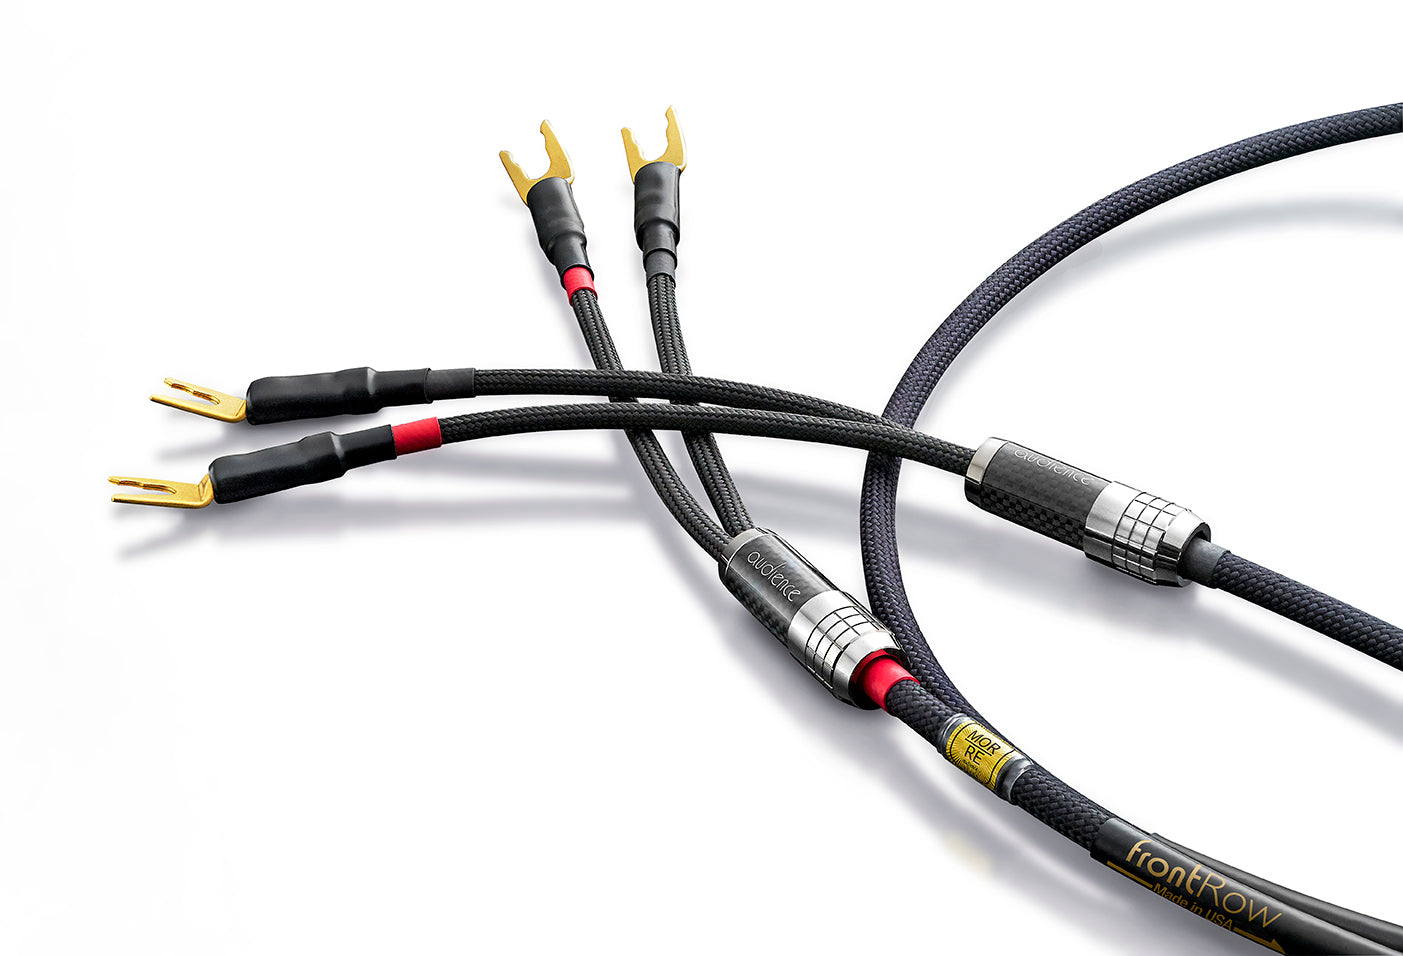 Audience frontRow Speaker Cables deliver ultimate resolution and supreme neutrality